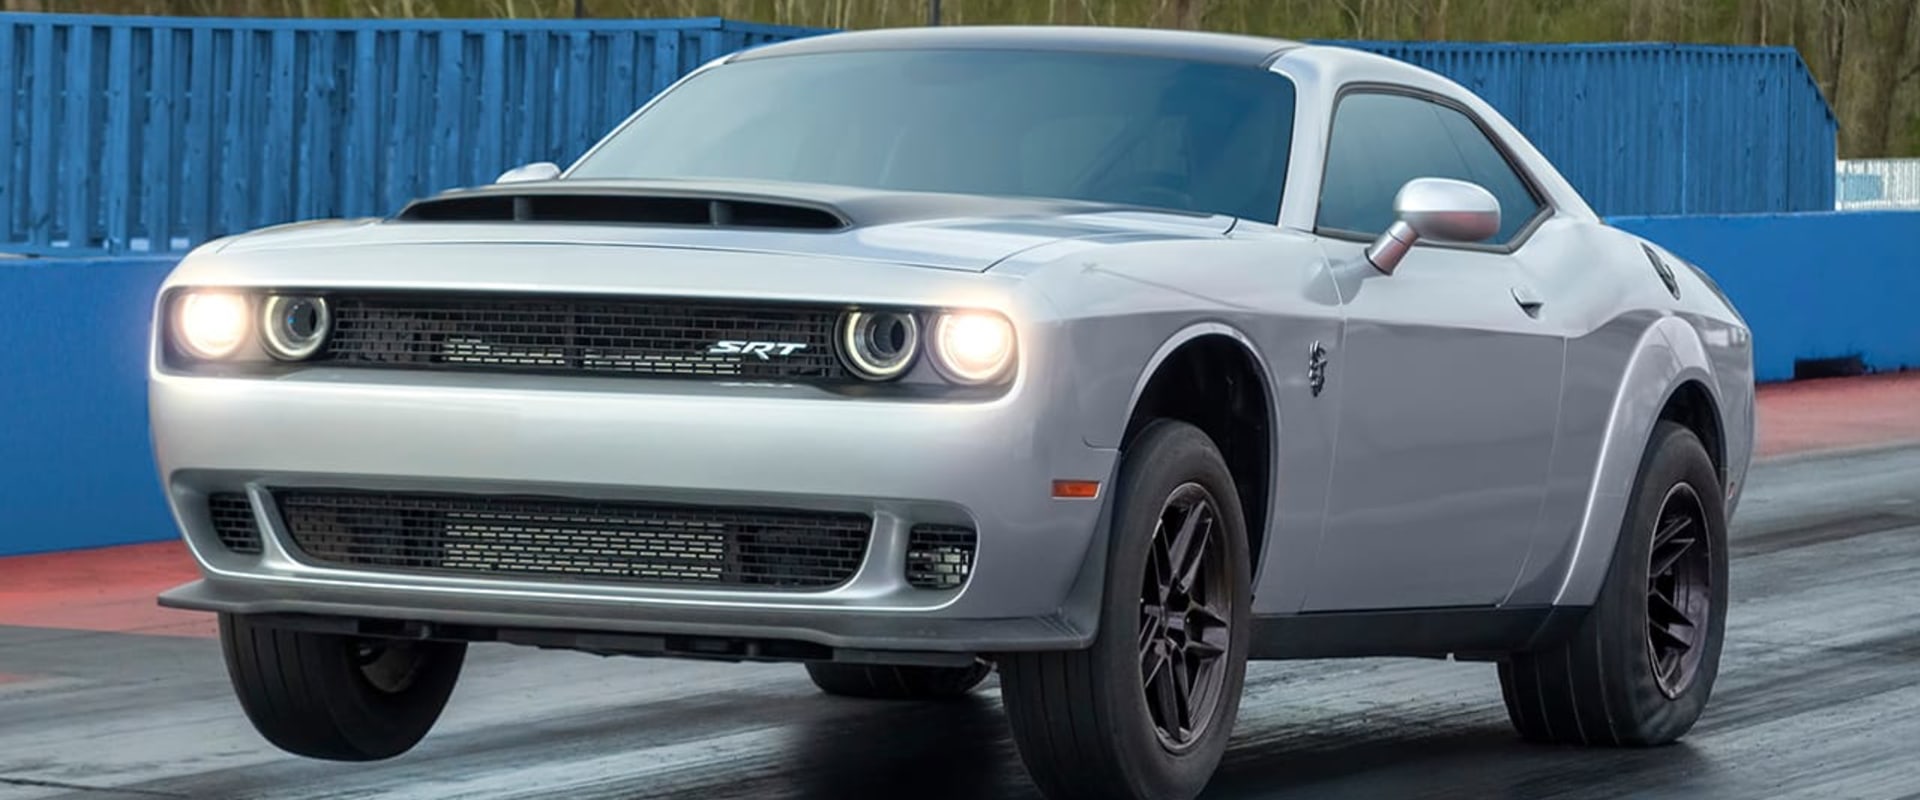 Muscle Cars: Exploring the Fastest and Most Powerful Cars on the Road